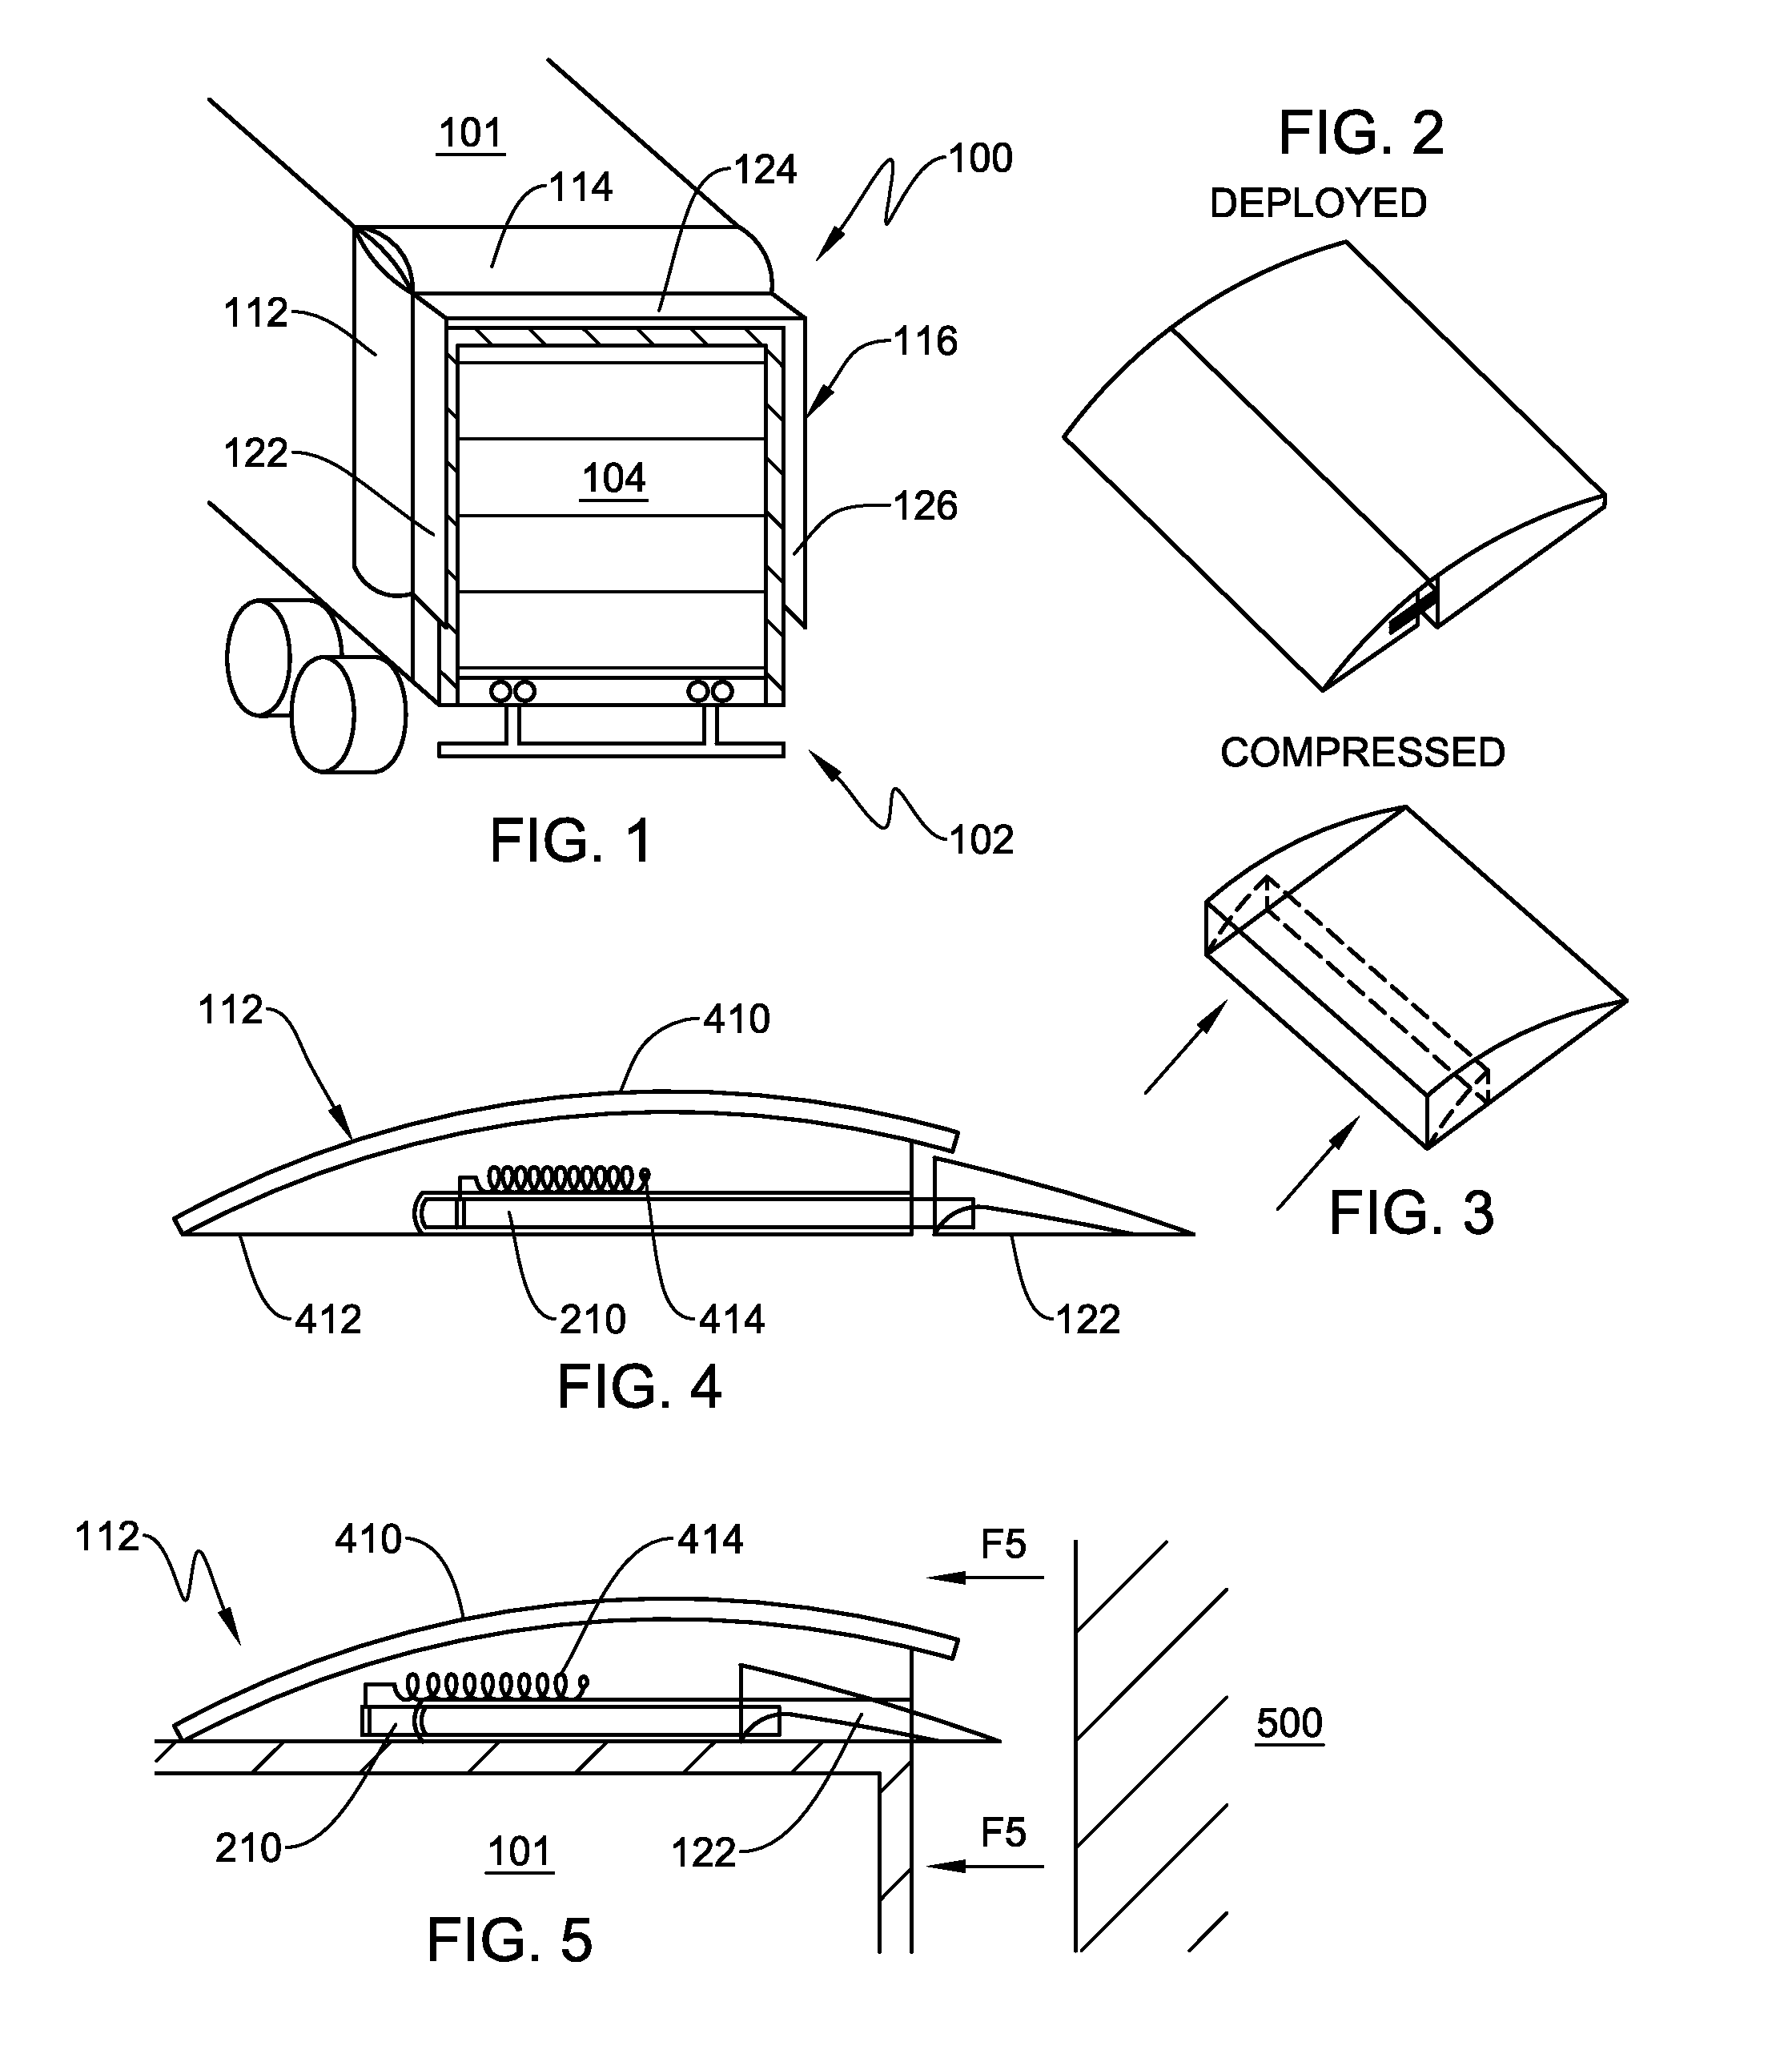 Rear-mounted retractable aerodynamic structure for cargo bodies